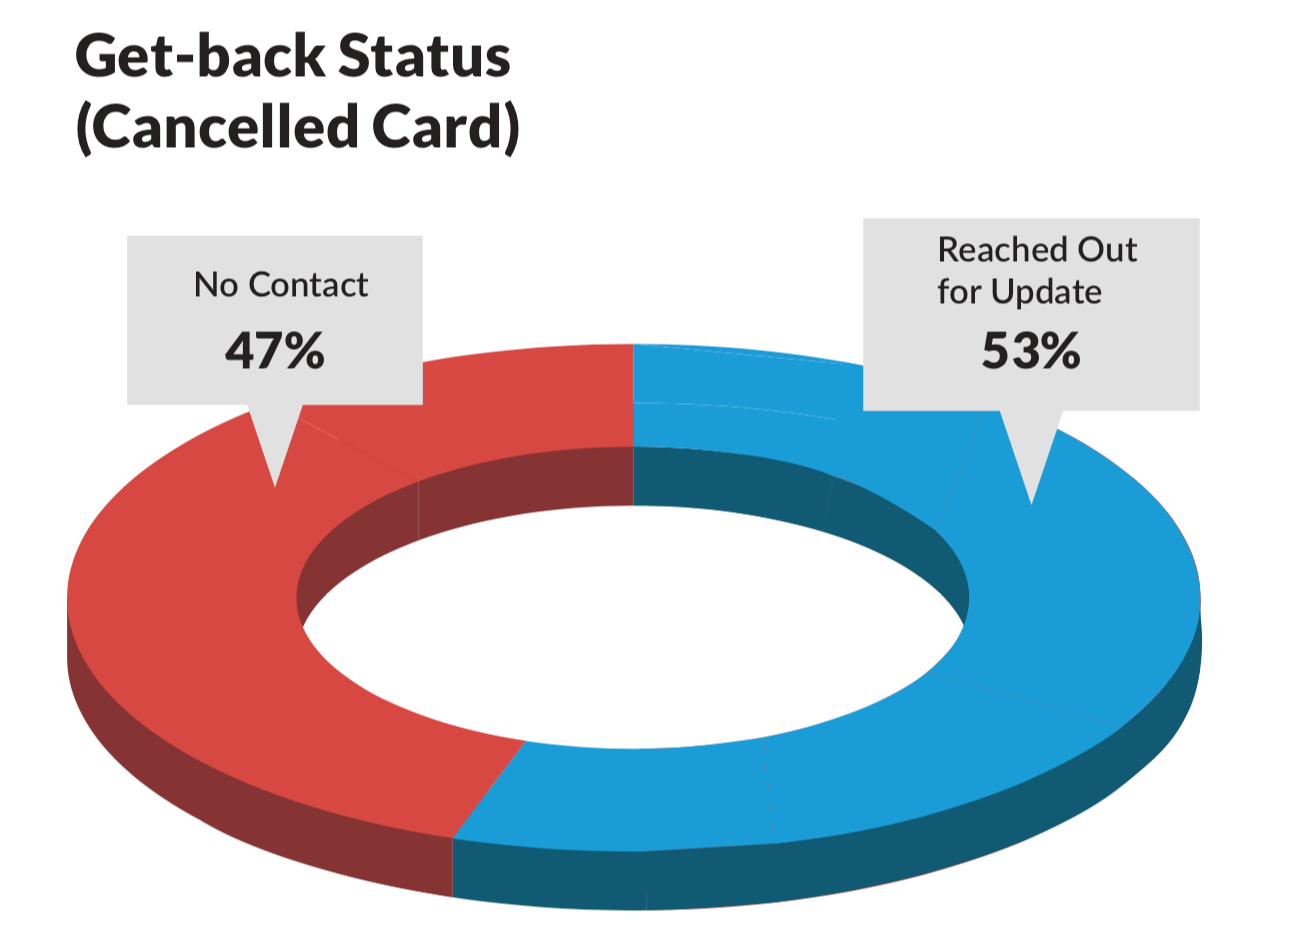 Nonprofits can improve fundraising by communicating with people who have outdated credit cards. Only 53% of nonprofits reached out to update credit card info, as this chart shows.